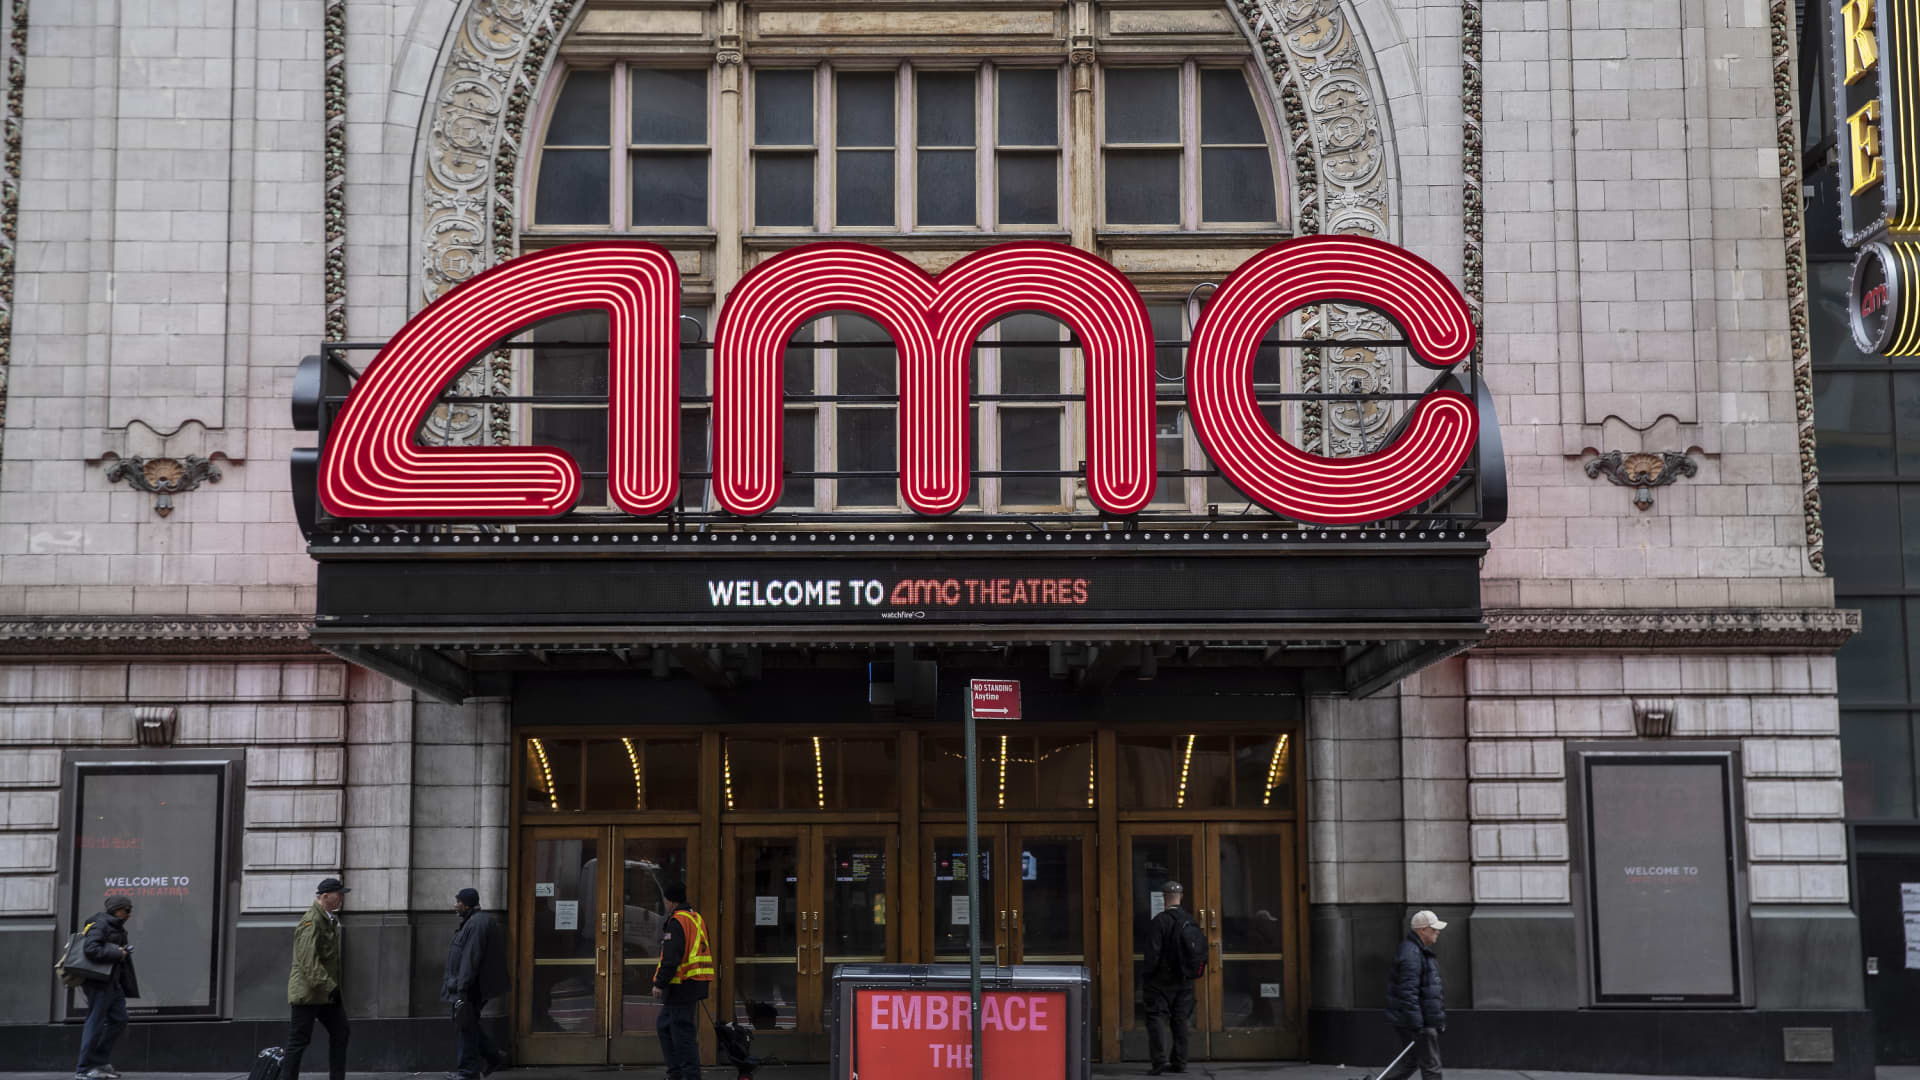 AMC Theatres is changing the way it prices movie tickets—here's how it will work - CNBC : Under the new model, AMC will divide up an auditorium's seats into "Standard Sightline," "Value Sightline" and "Preferred Sightline" tiers.  | Tranquility 國際社群